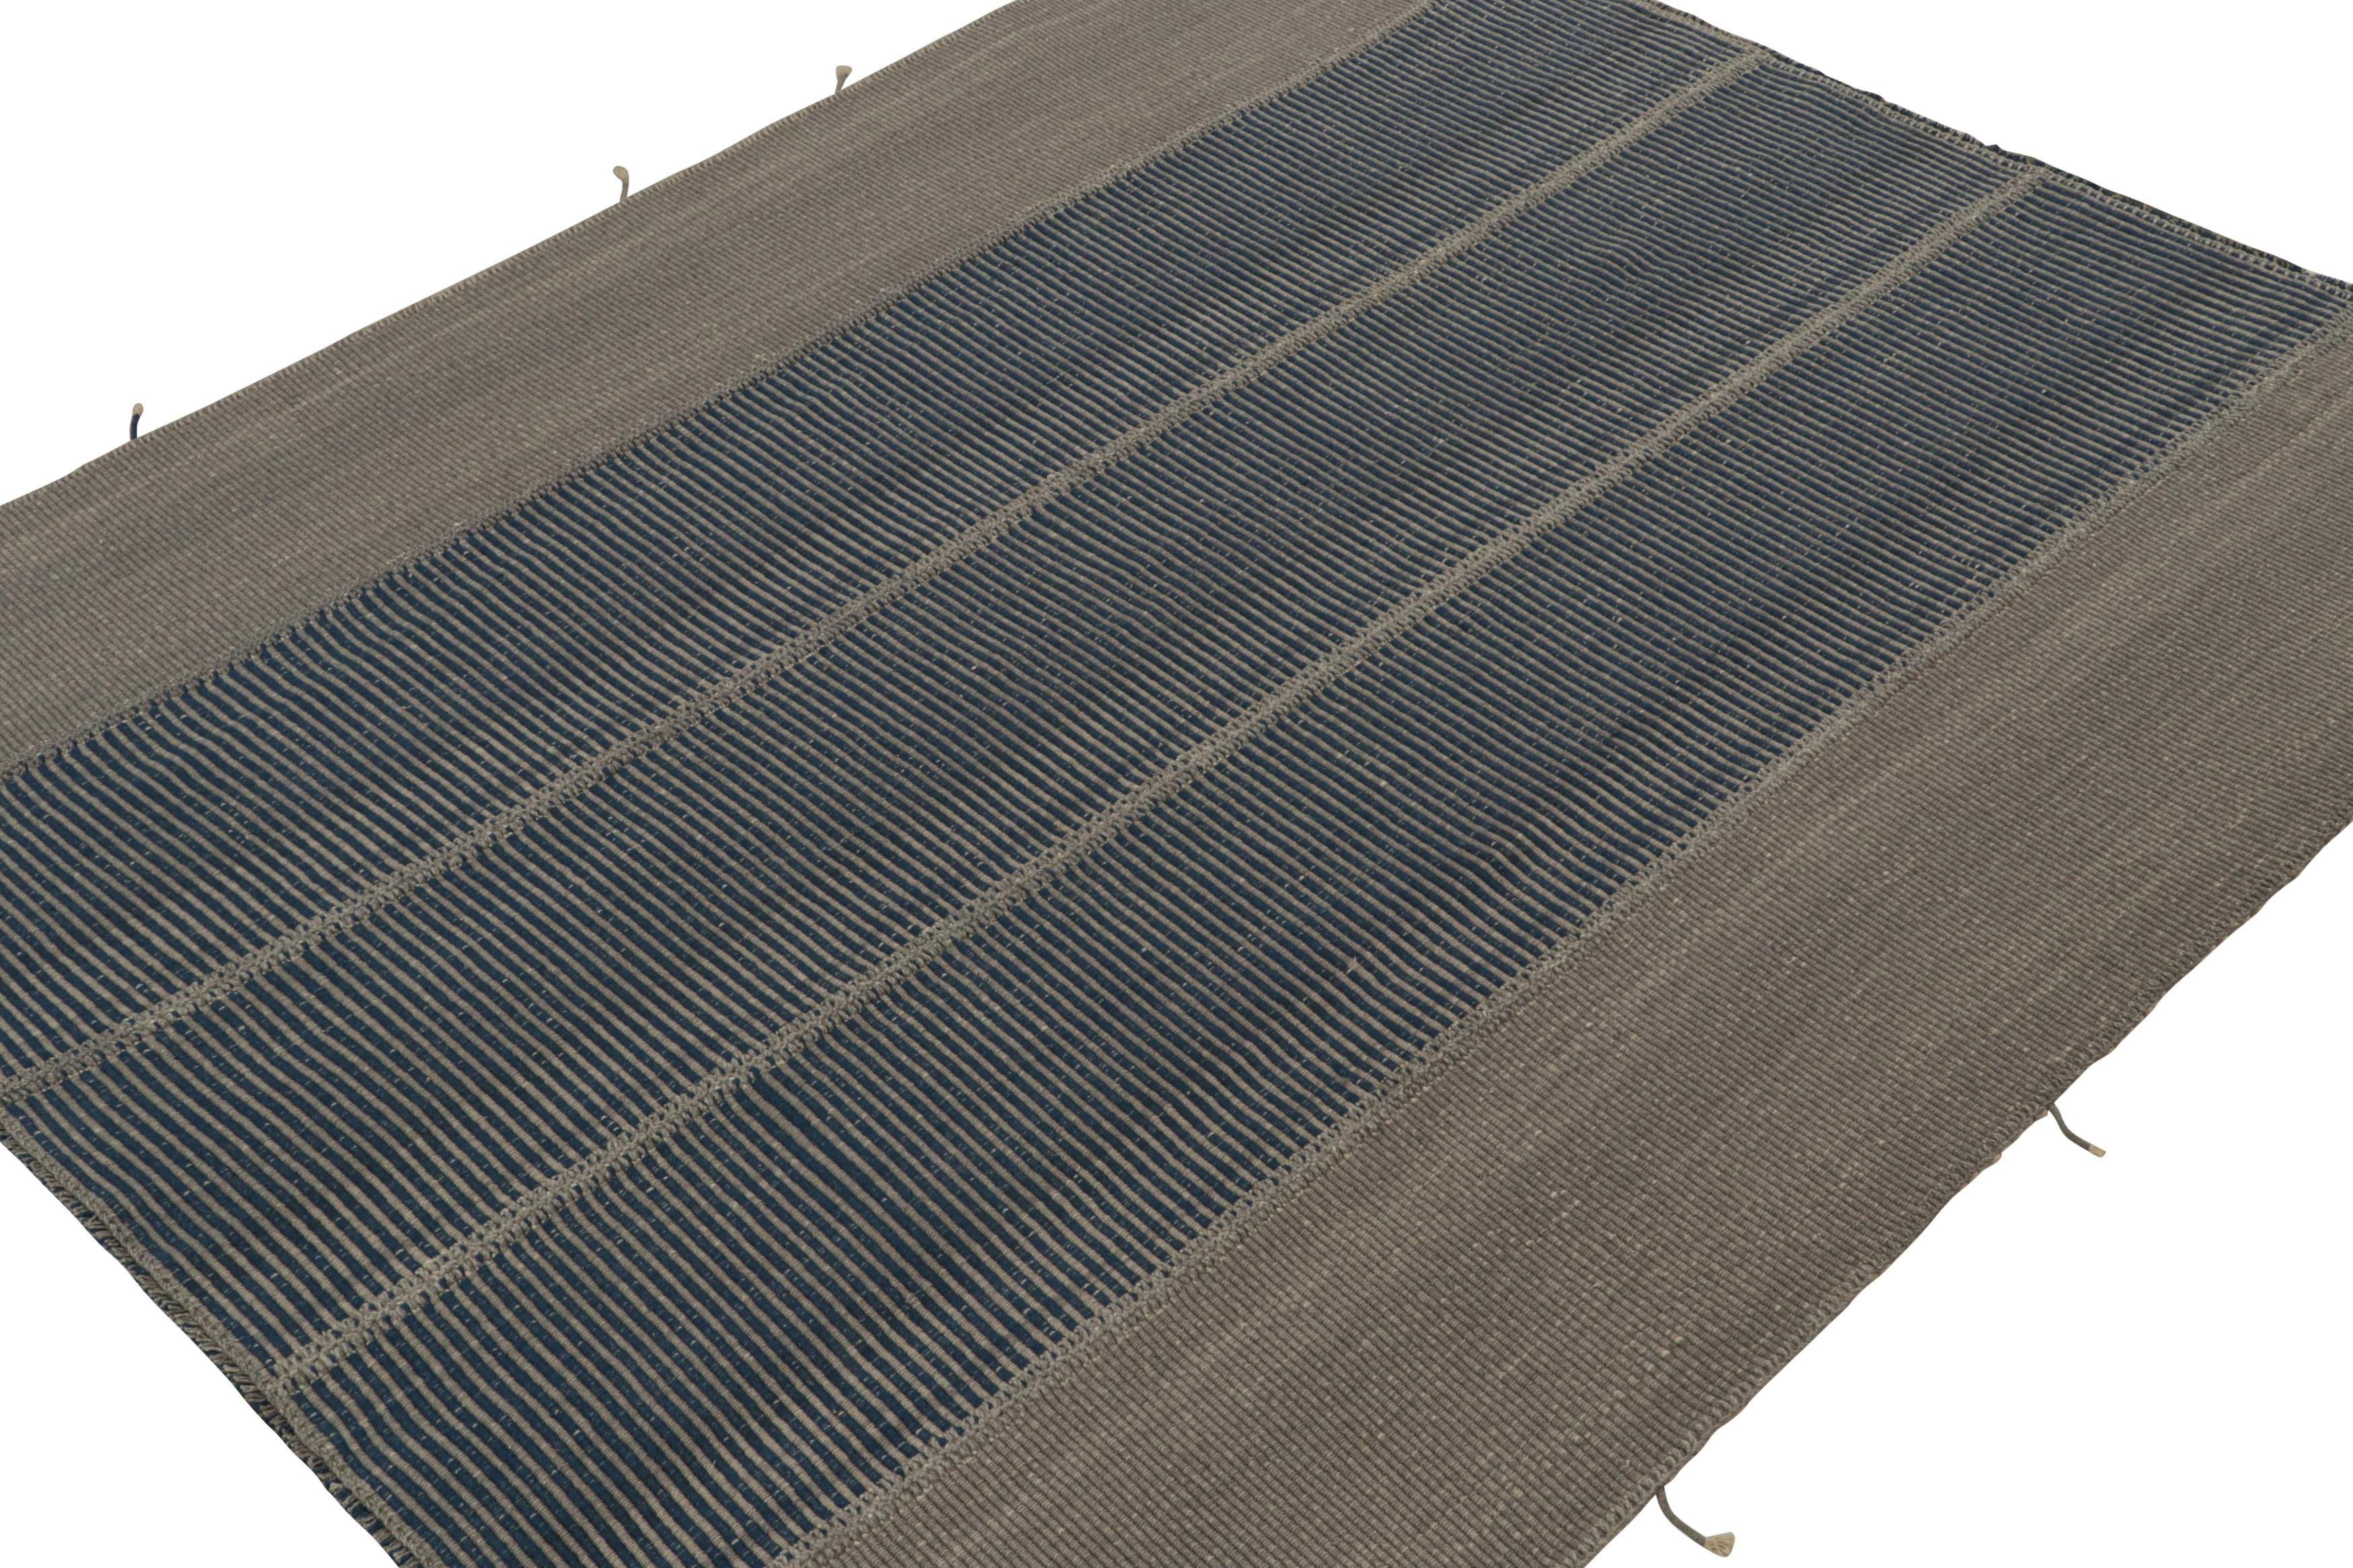 Handwoven in wool, a 8x10 Kilim in gray and blue accents, from a bold new line of contemporary flatweaves, ‘Rez Kilim’, by Rug & Kilim.

On the design: 

Connoting a modern take on classic panel-weaving, our latest “Rez Kilim” enjoys gray and blue